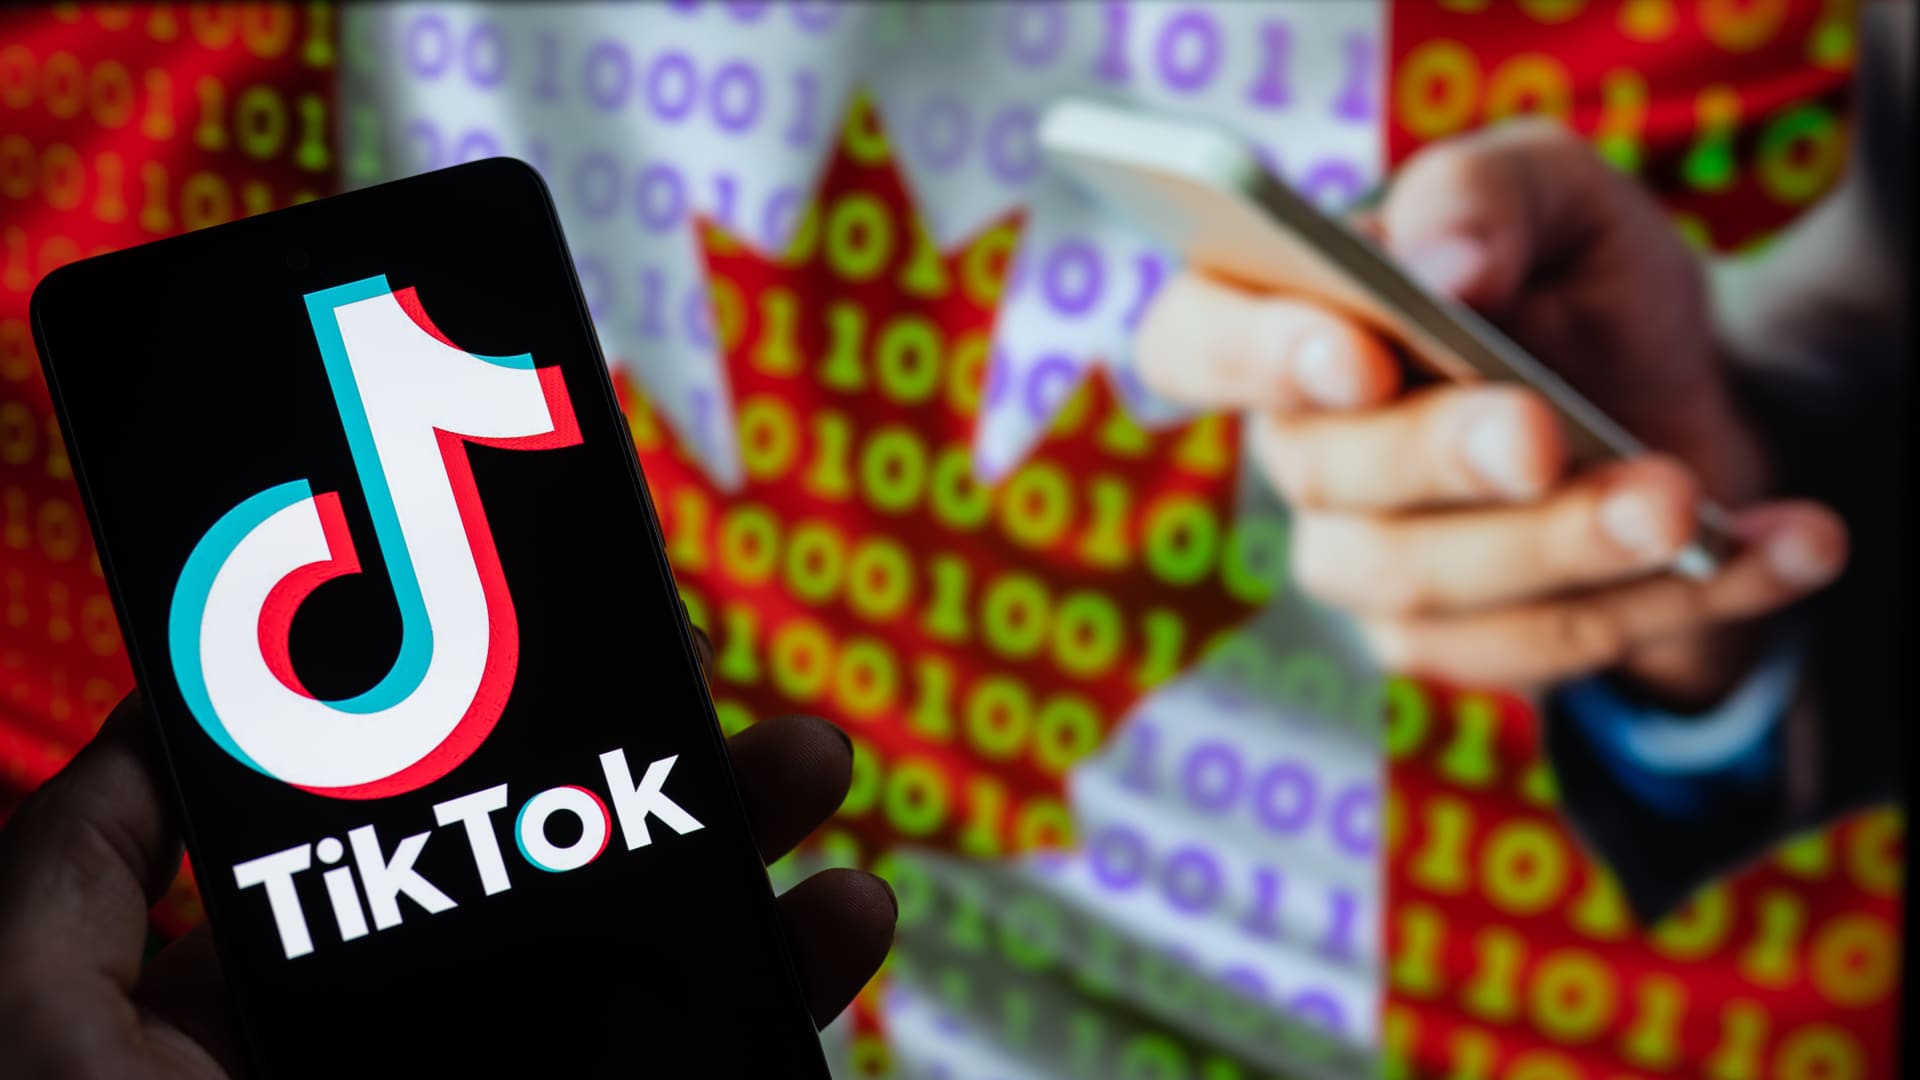 TikTok sets automatic one-hour screen time limit for teens